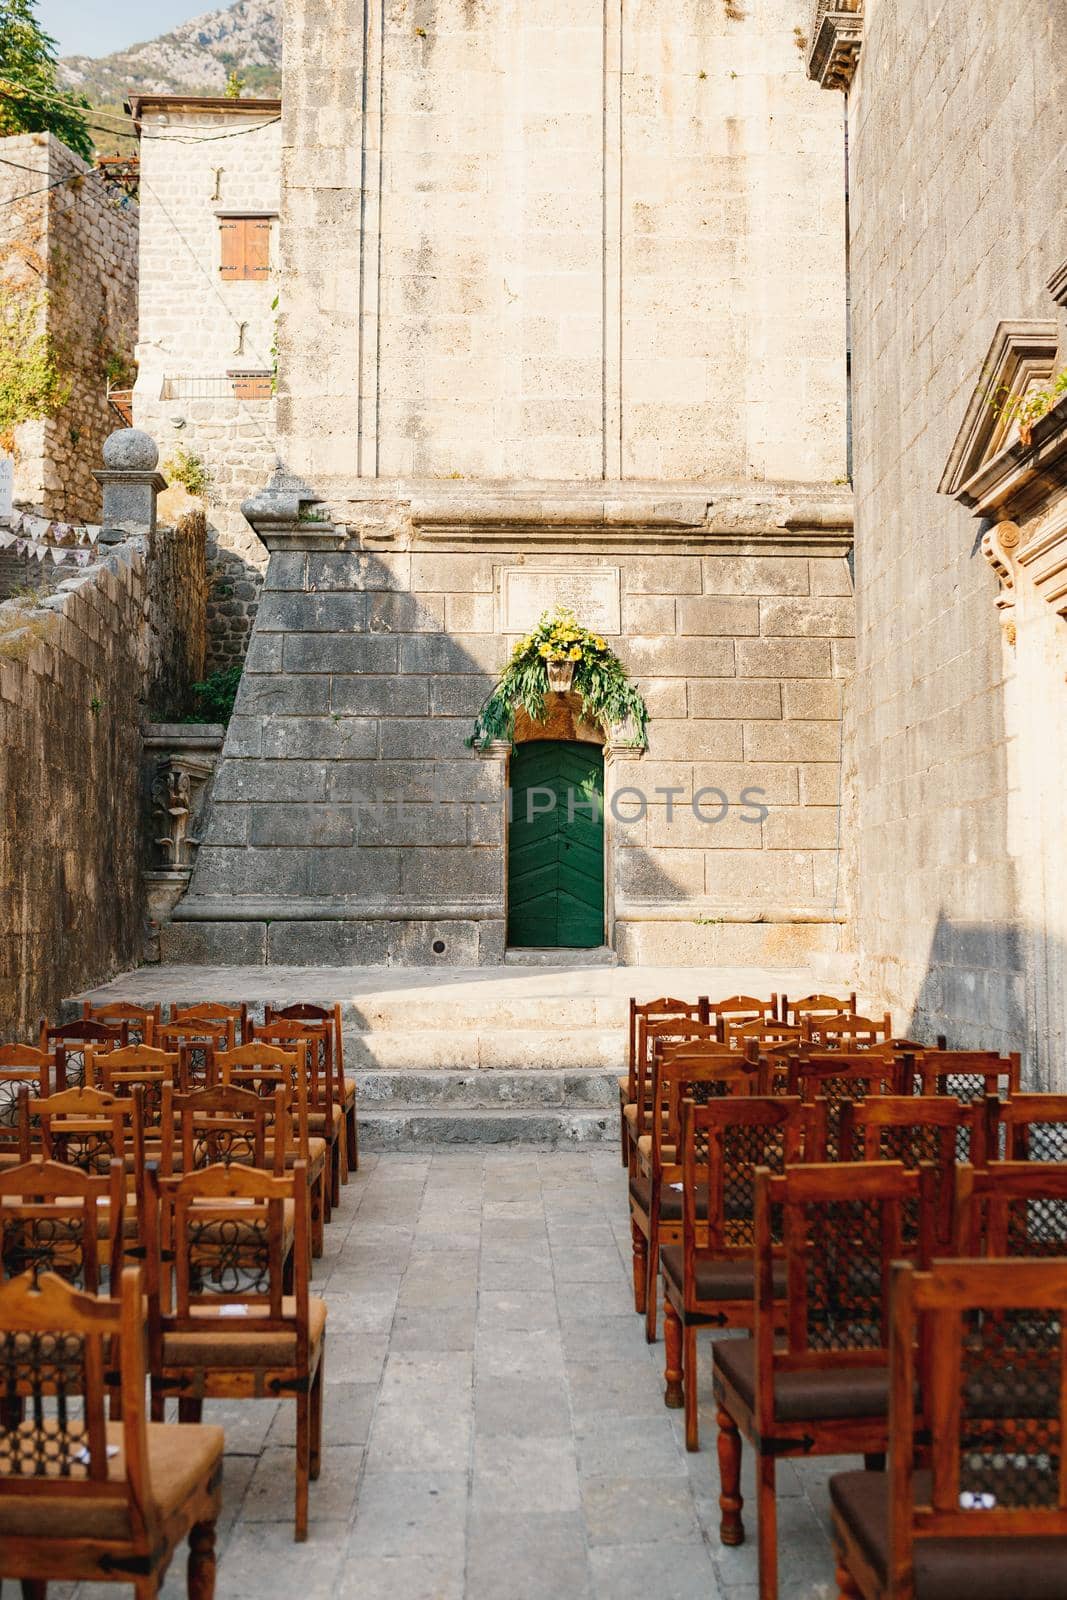 Wooden chairs with patterns on the backs stand in rows on the cobblestones in front of the church door. High quality photo